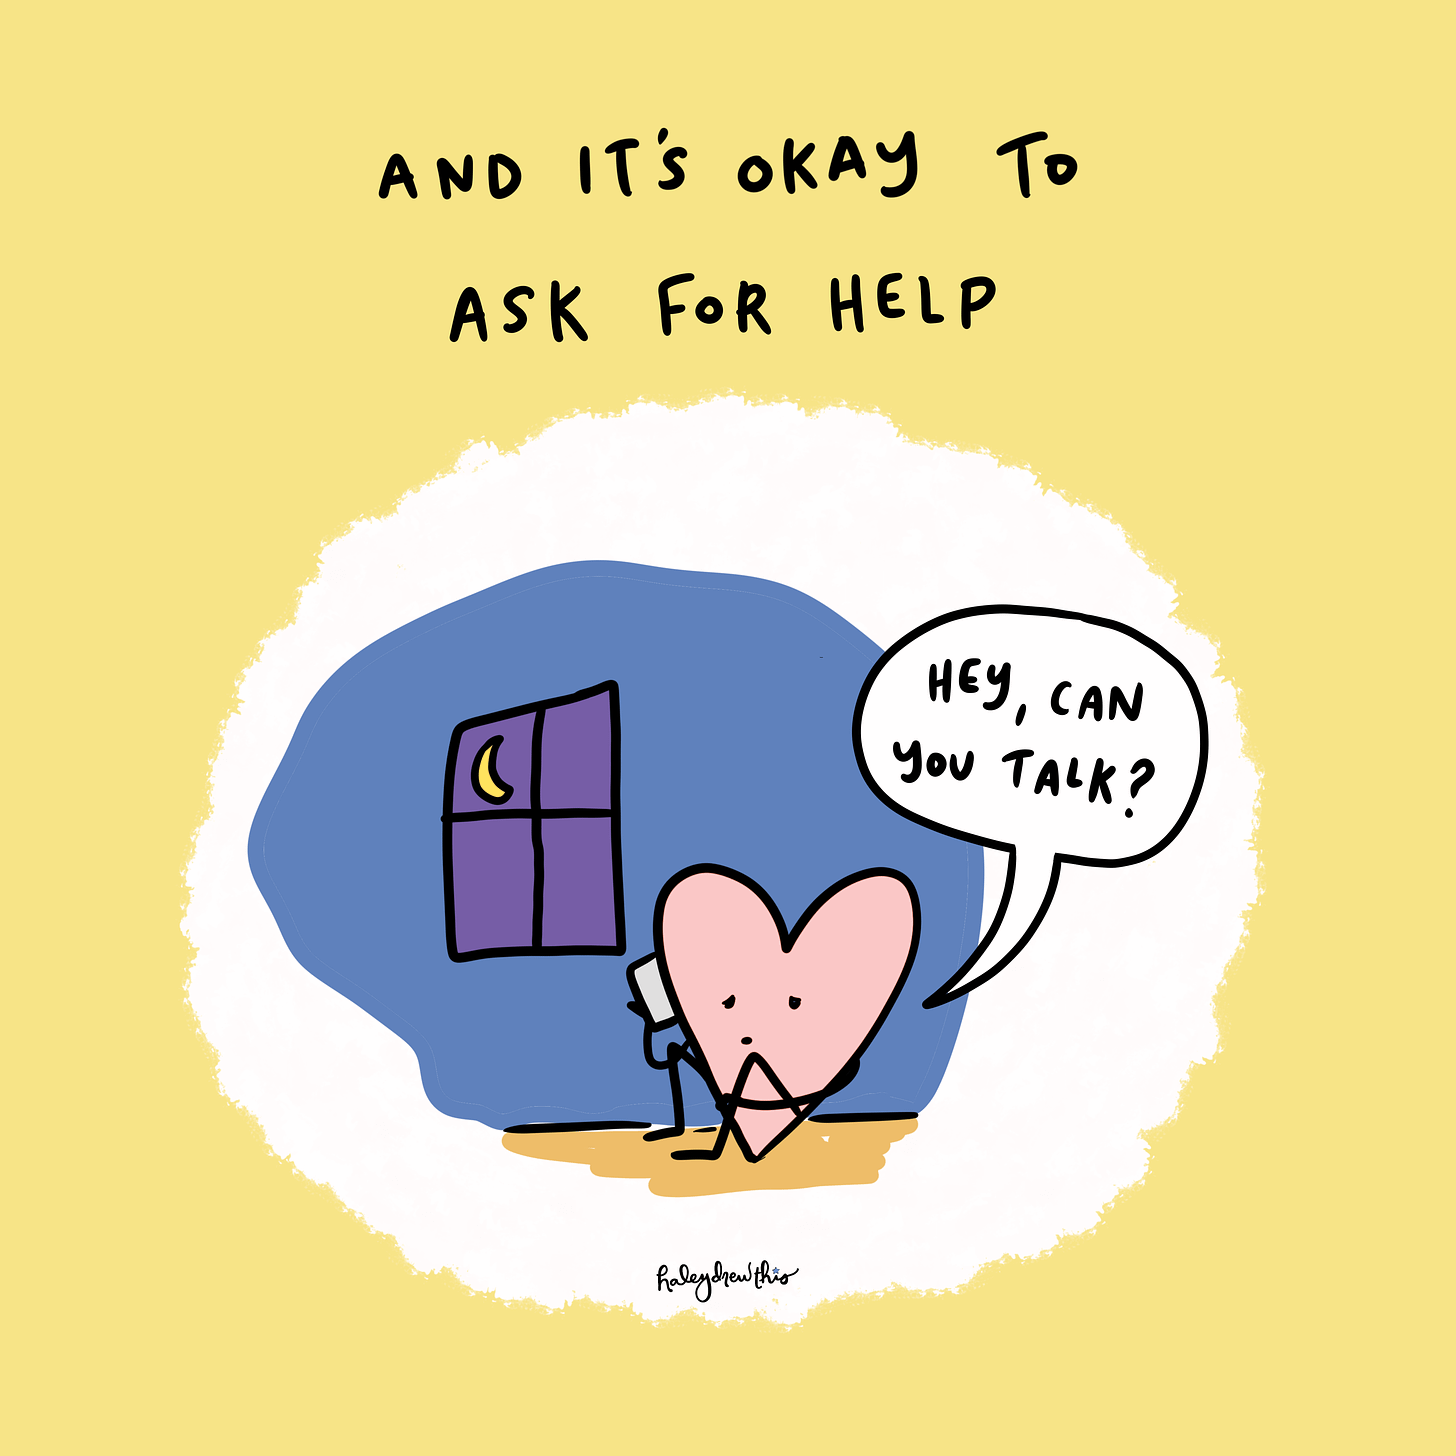 Title: And it's okay to ask for help. Heart calling someone at night, saying, "Hey can you talk?"